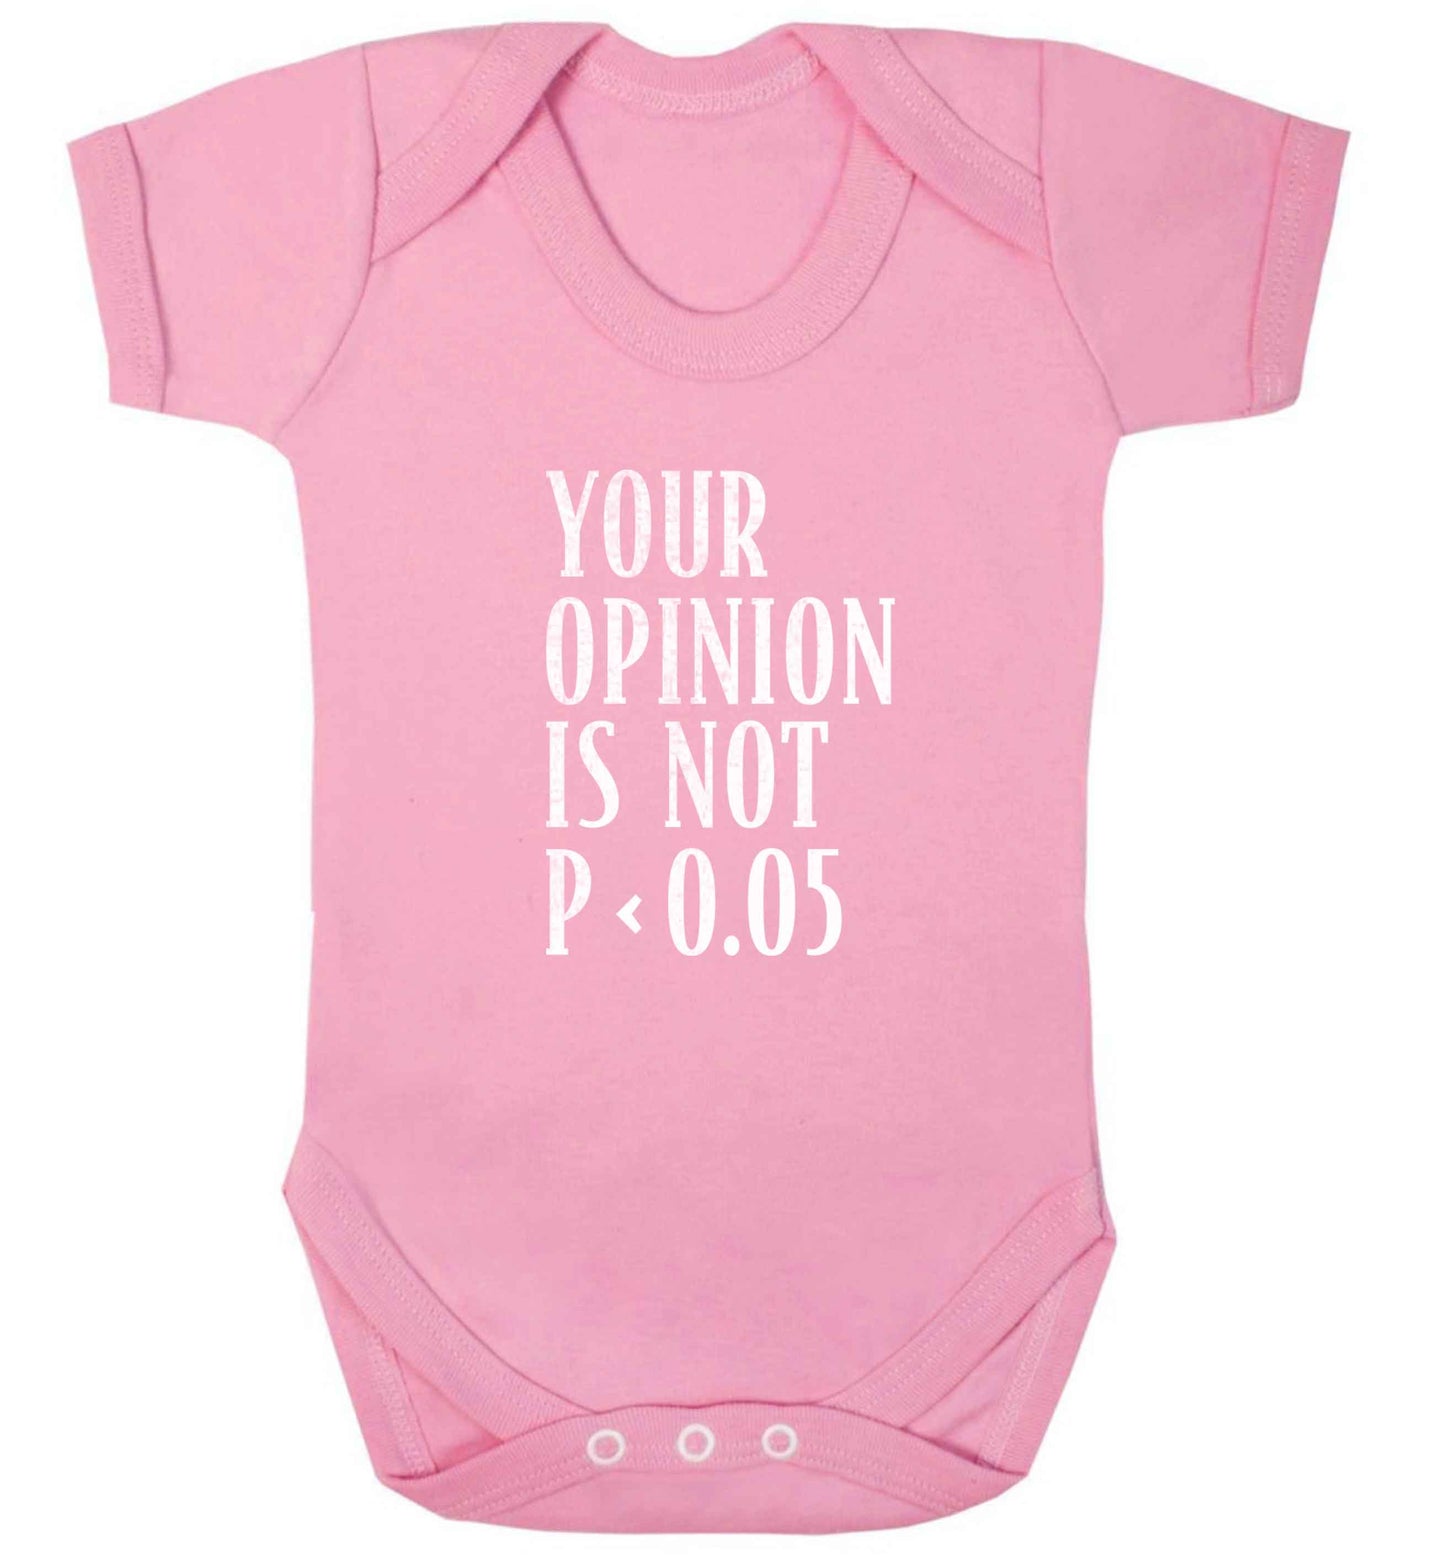 Your opinion is not P < 0.05baby vest pale pink 18-24 months